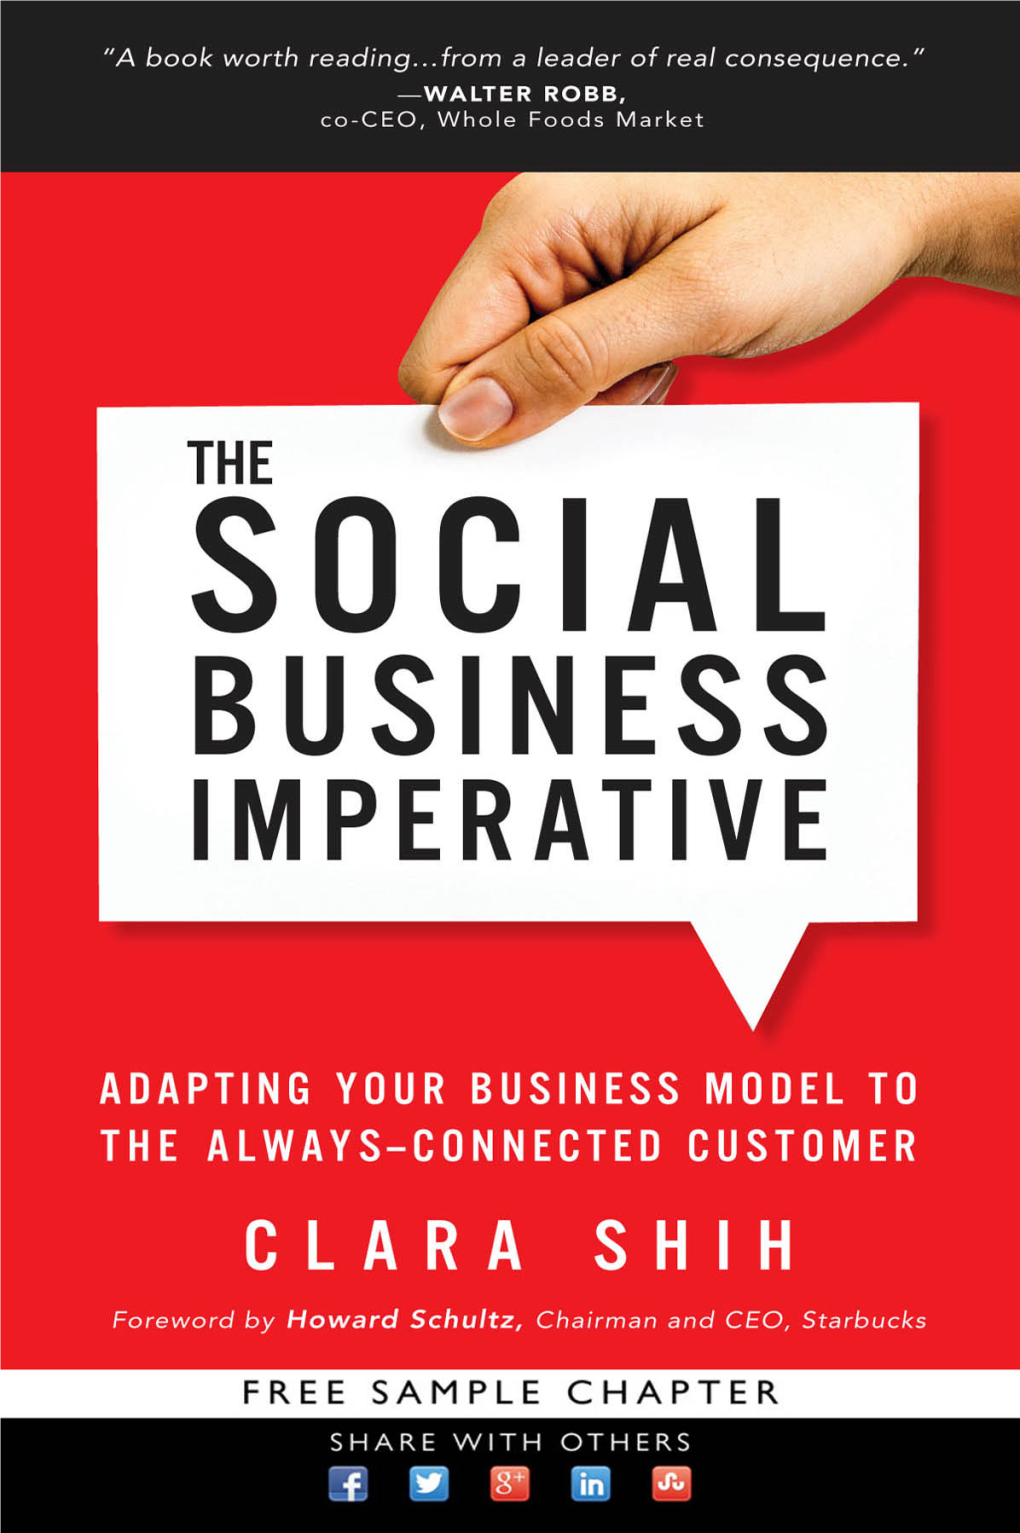 The Social Business Imperative